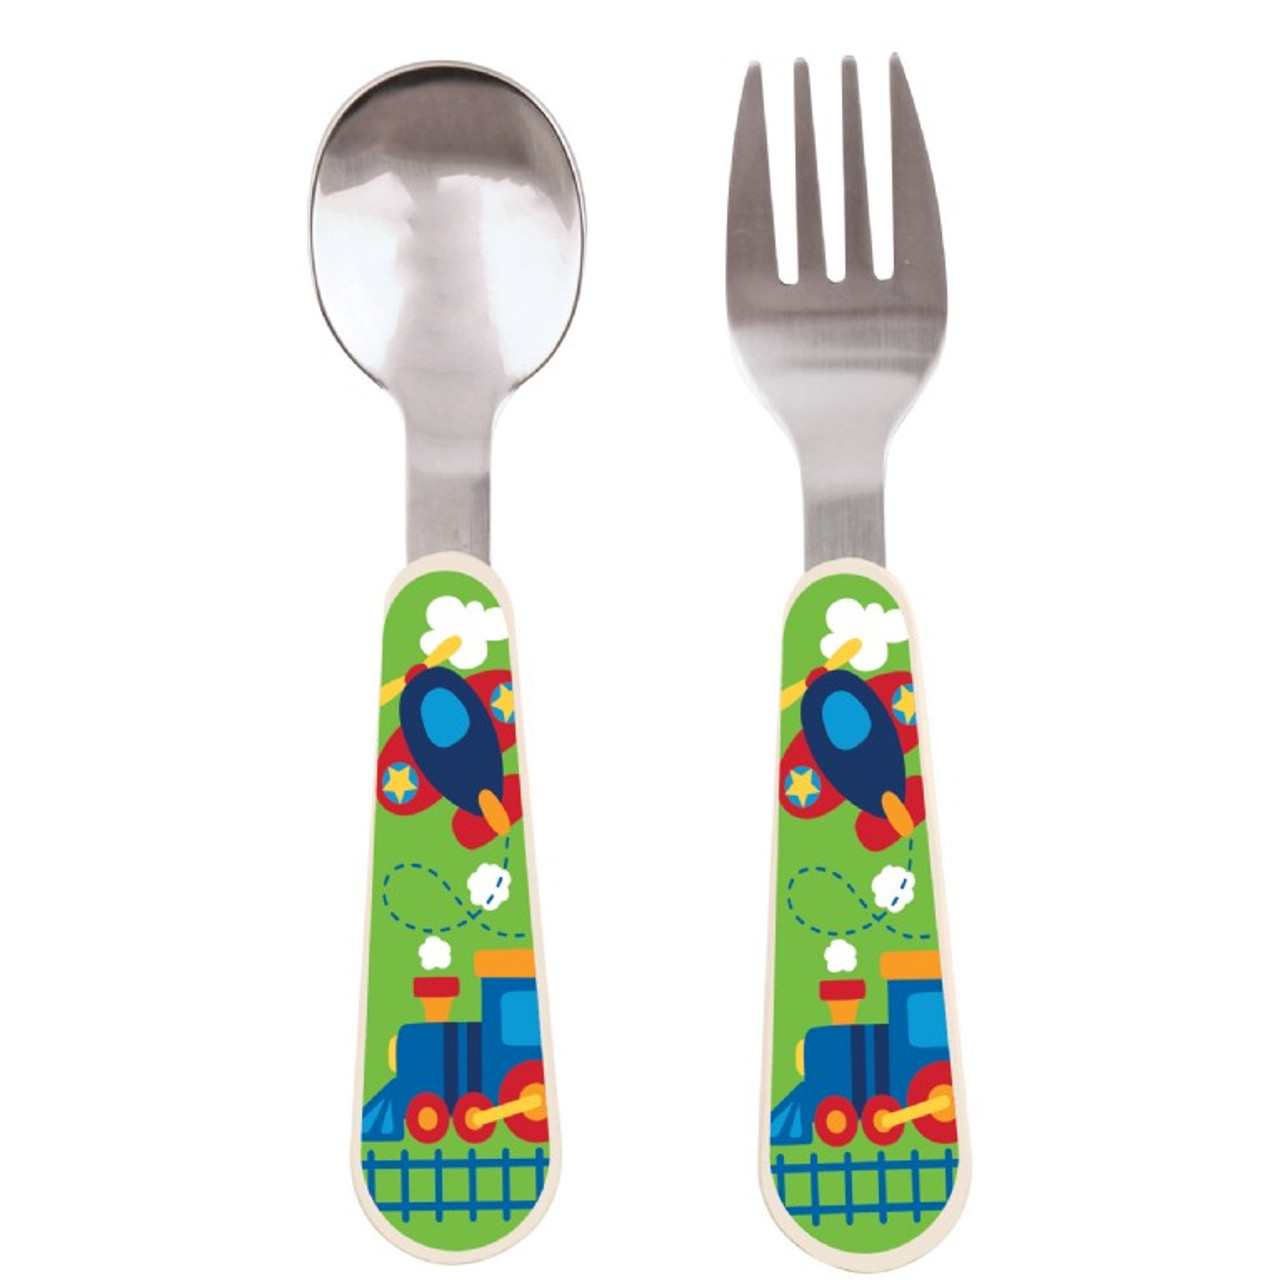 Airplane Toddler Spoon & Fork Set
Airplane S&F